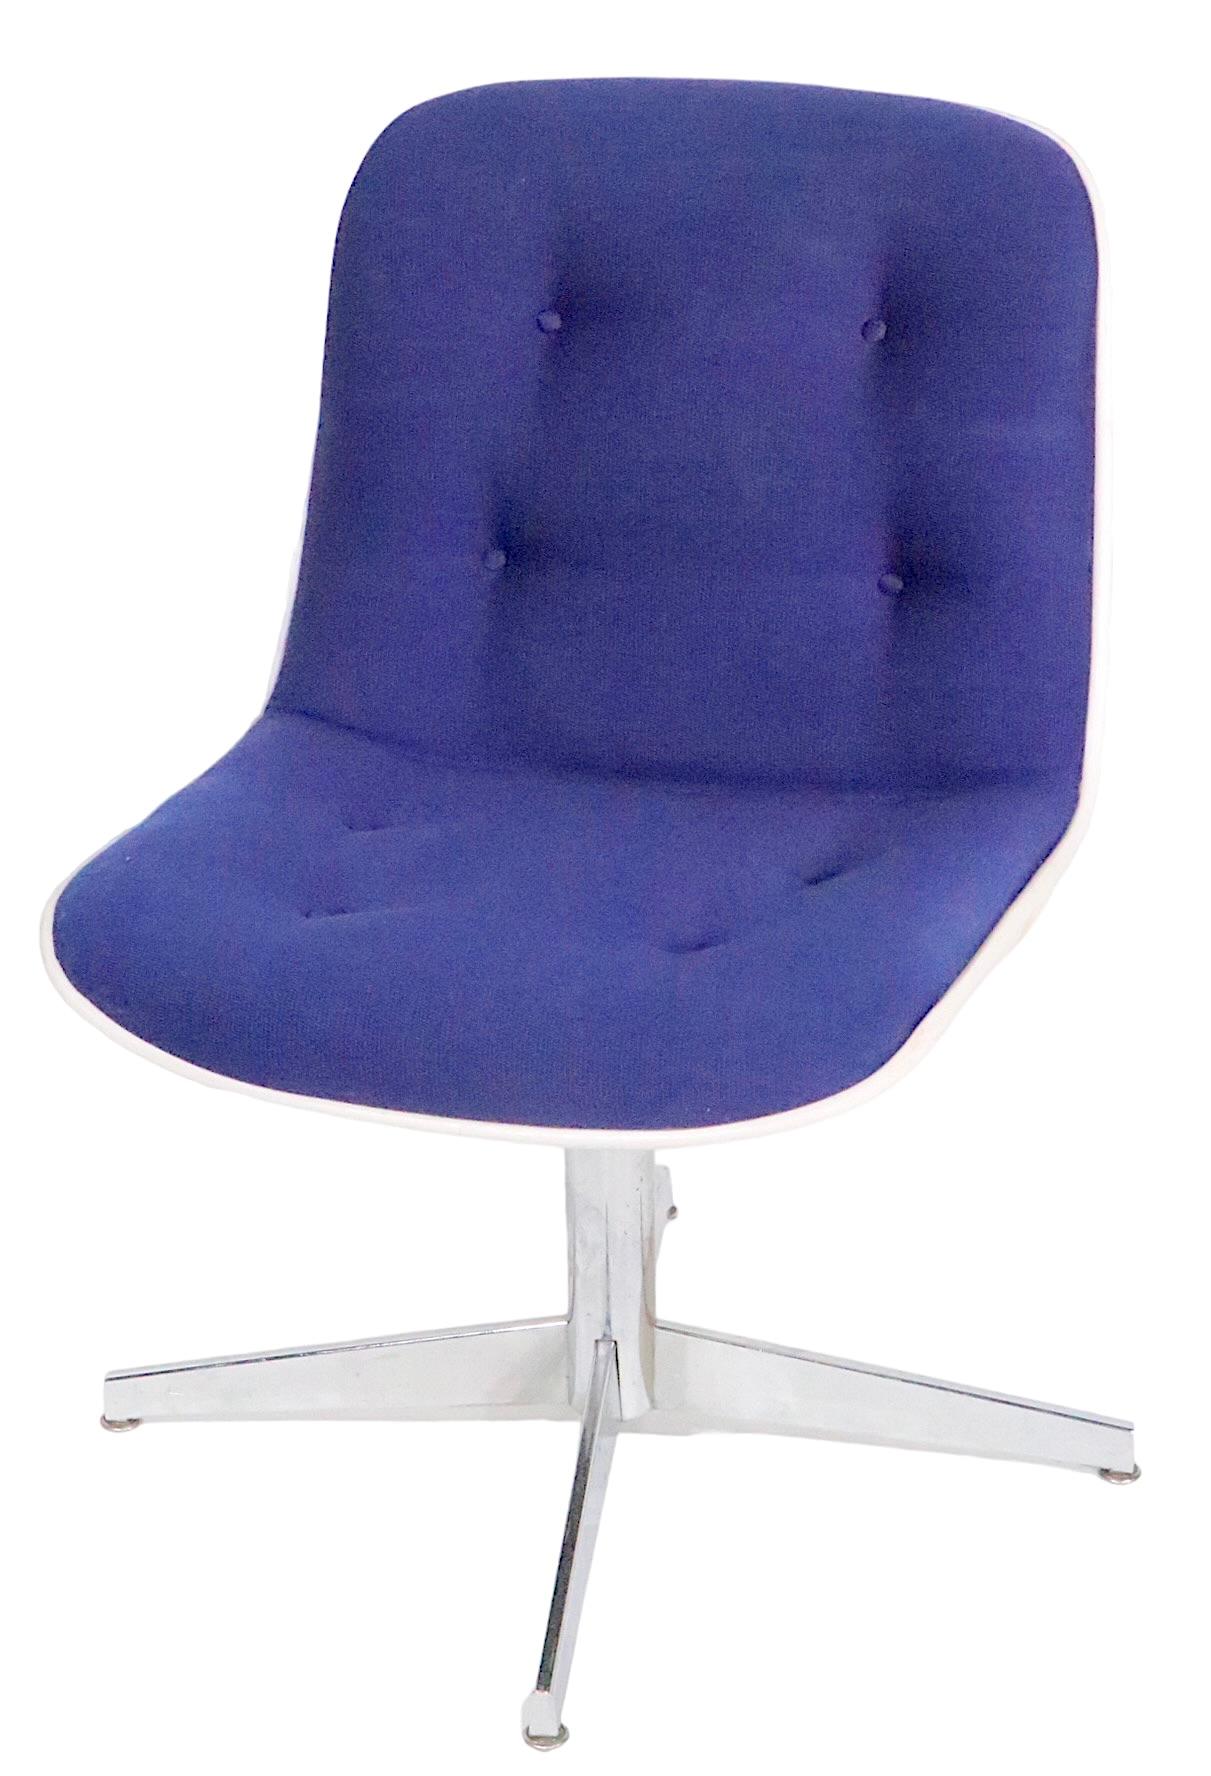 Late 20th Century Steelcase Swivel  Chairs in the style of Pollack c.1970's 6 available For Sale